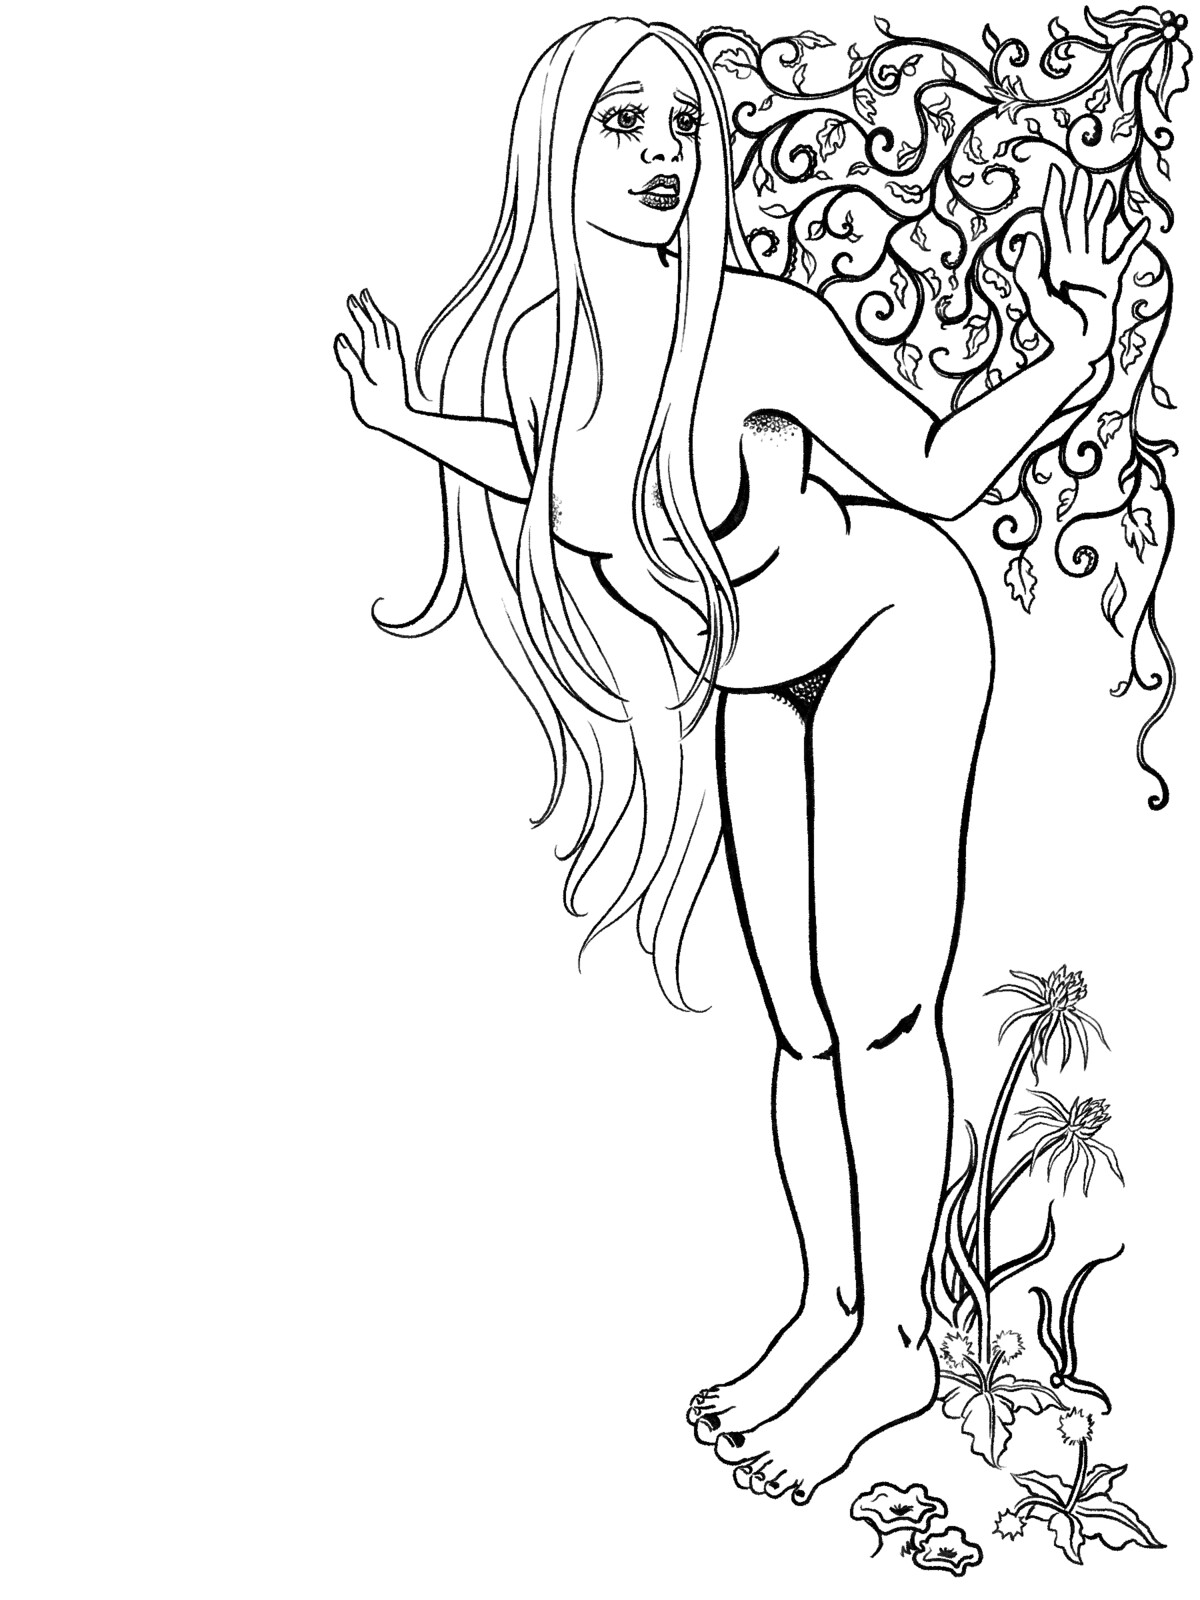 A light-haired nymph poses leaning forward, surrounded by climbing ivy